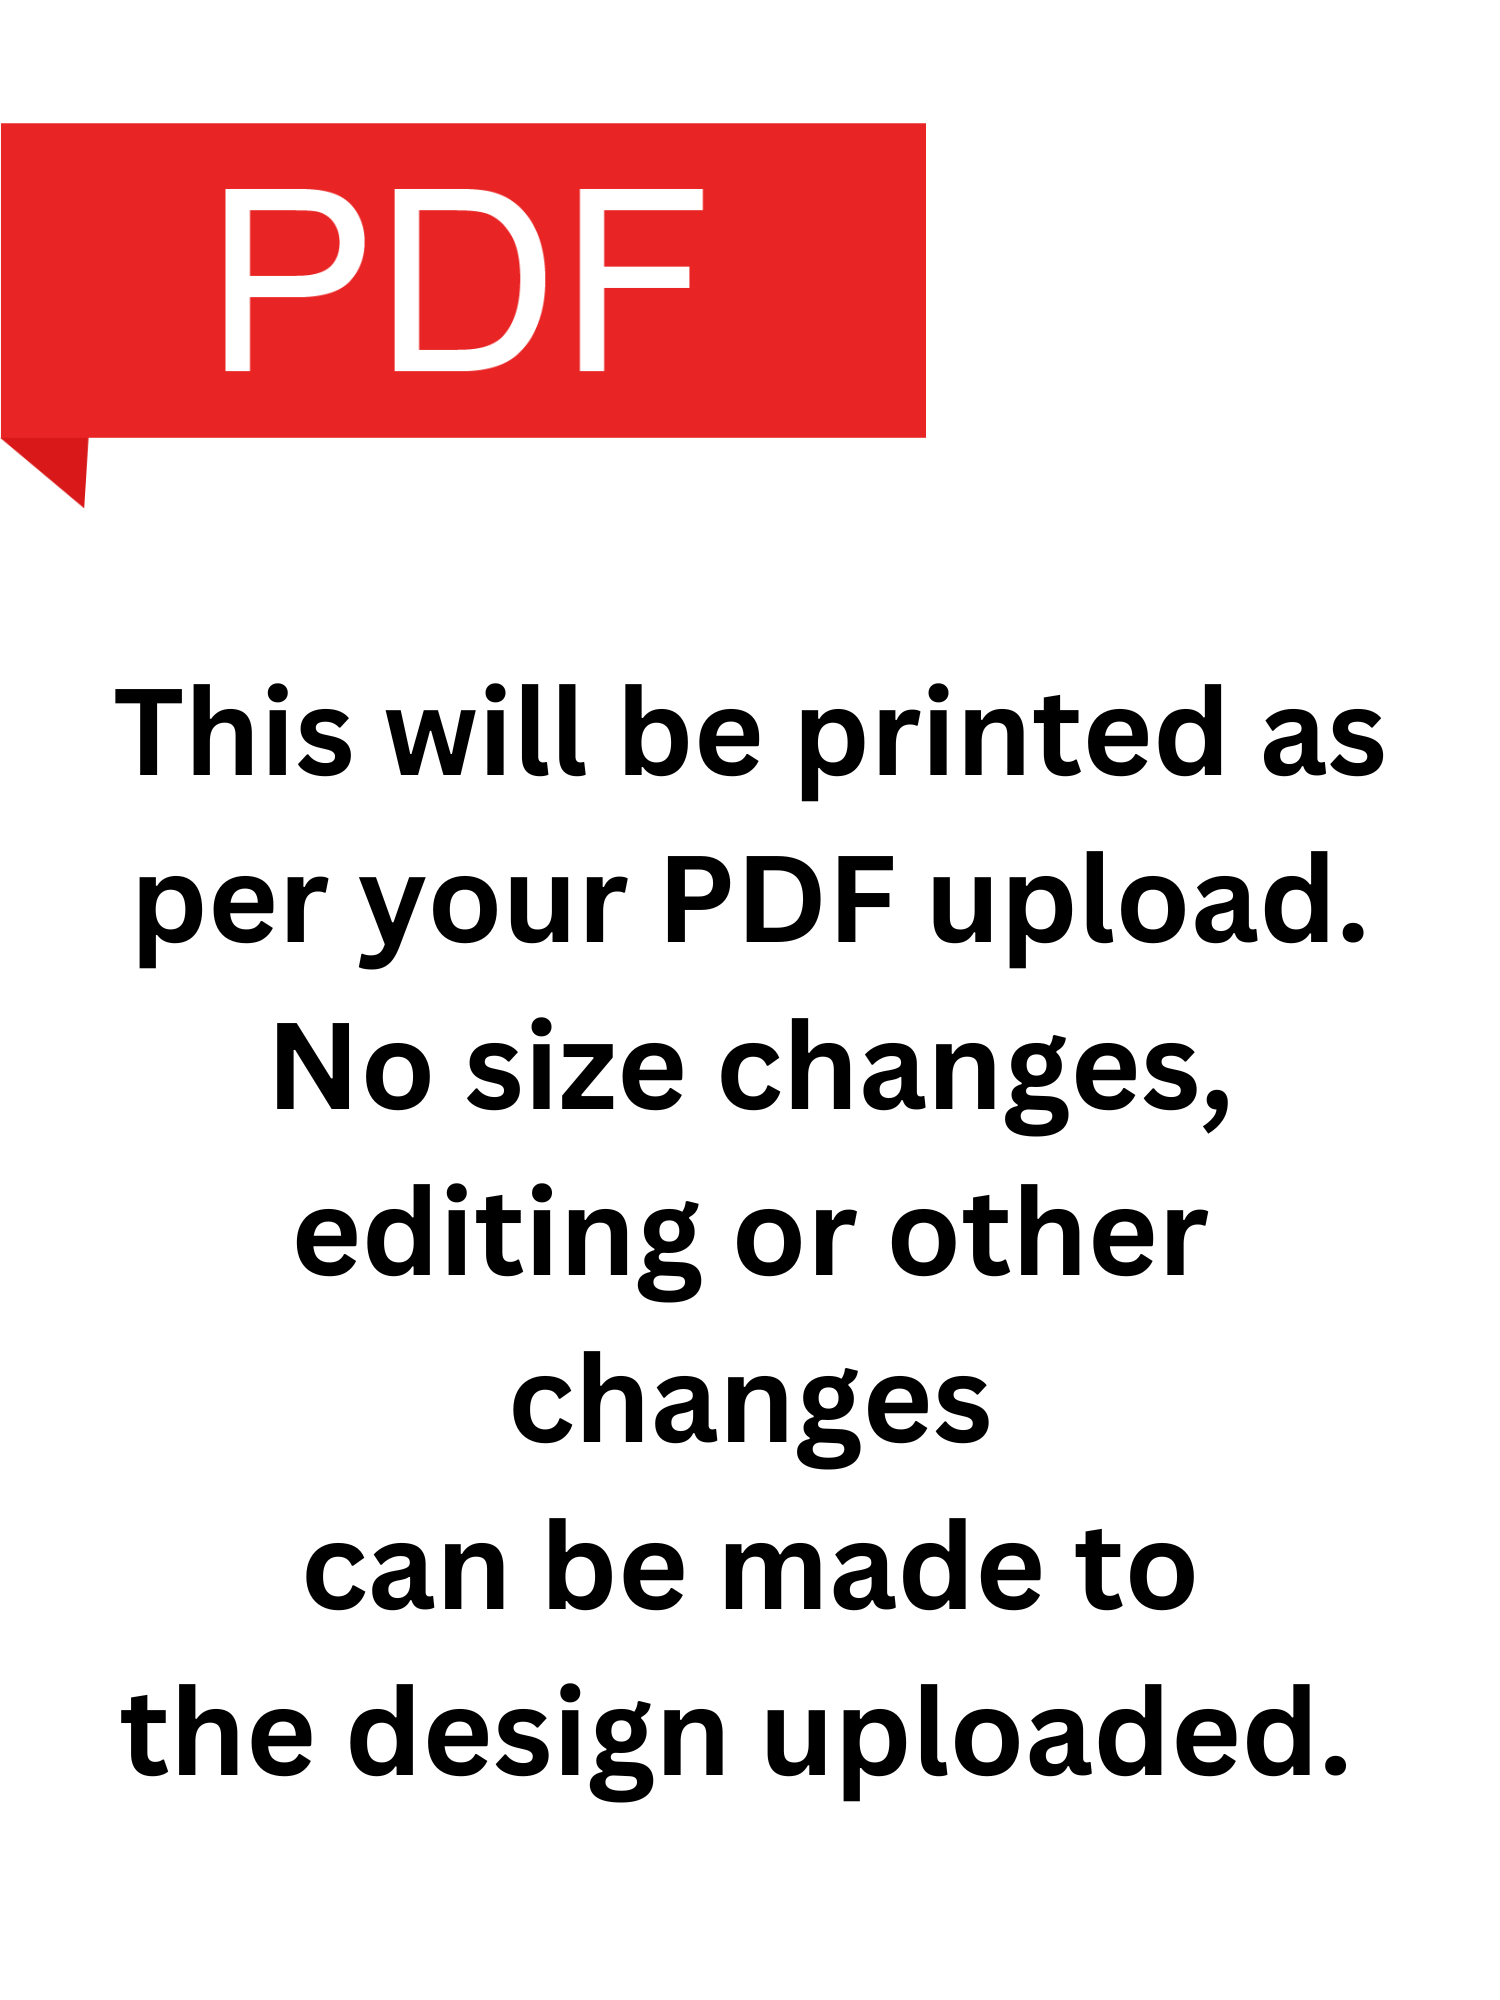 PDF Upload Your own Design  Personalised Edible Printed Cake Topper Icing Sheet Full A4 Sheet